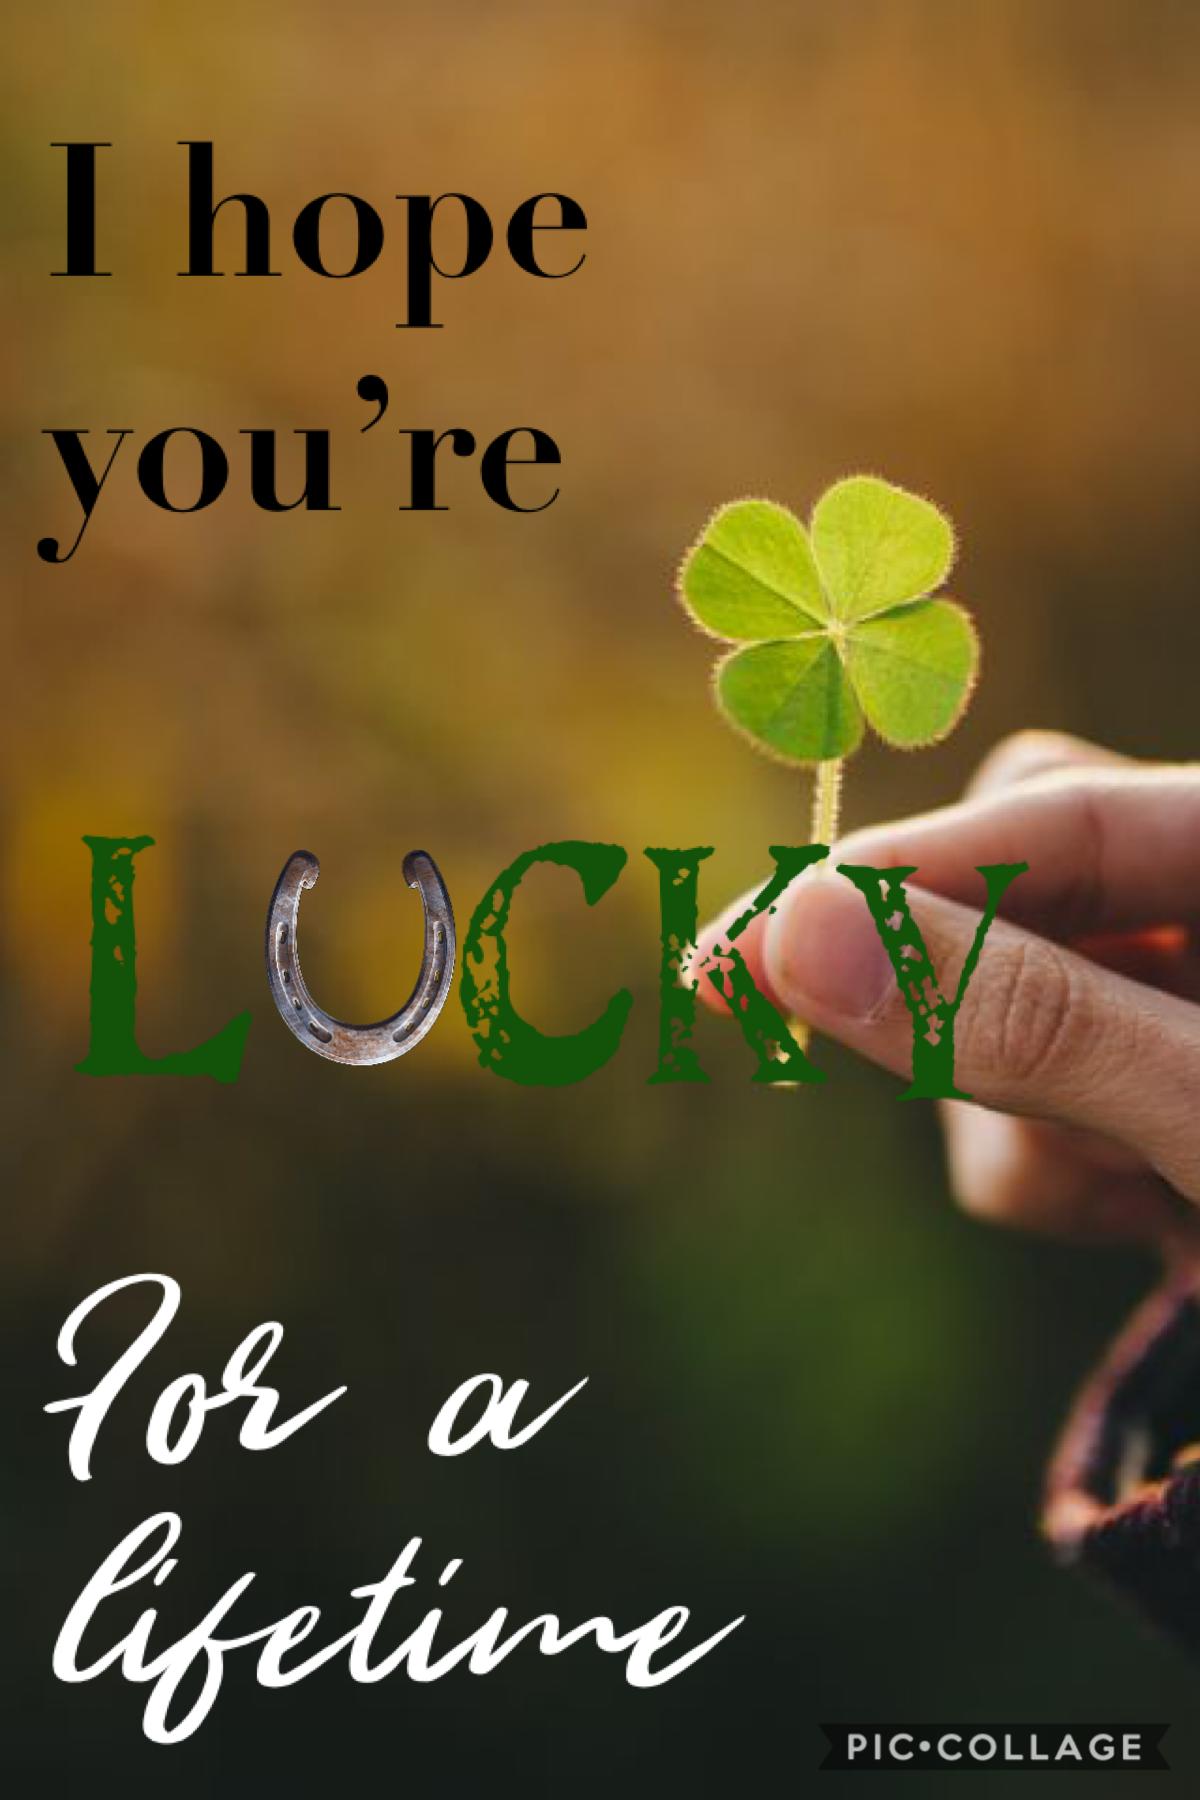 I hope you’re lucky now and forever